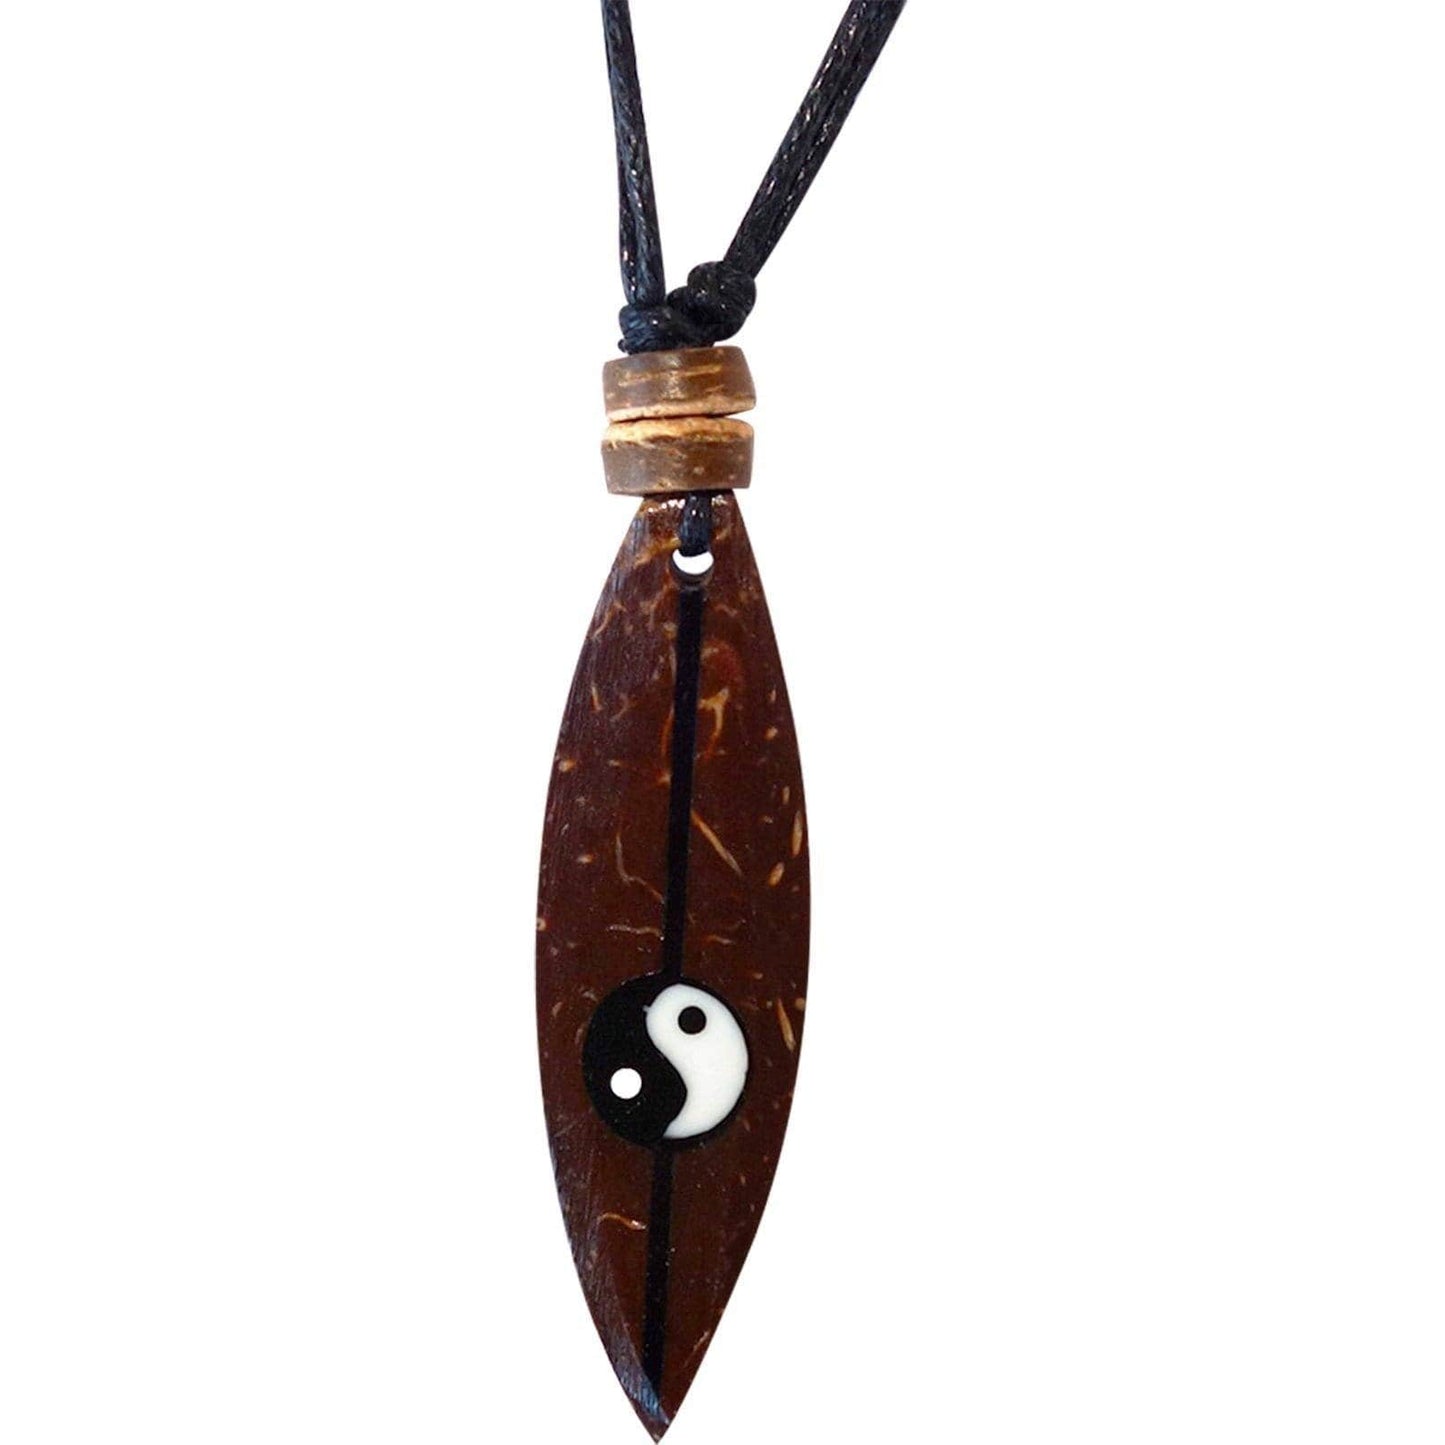 Wood Surfboard Yin and Yang Necklace Pendant Chain Mens Womens Kids Jewellery